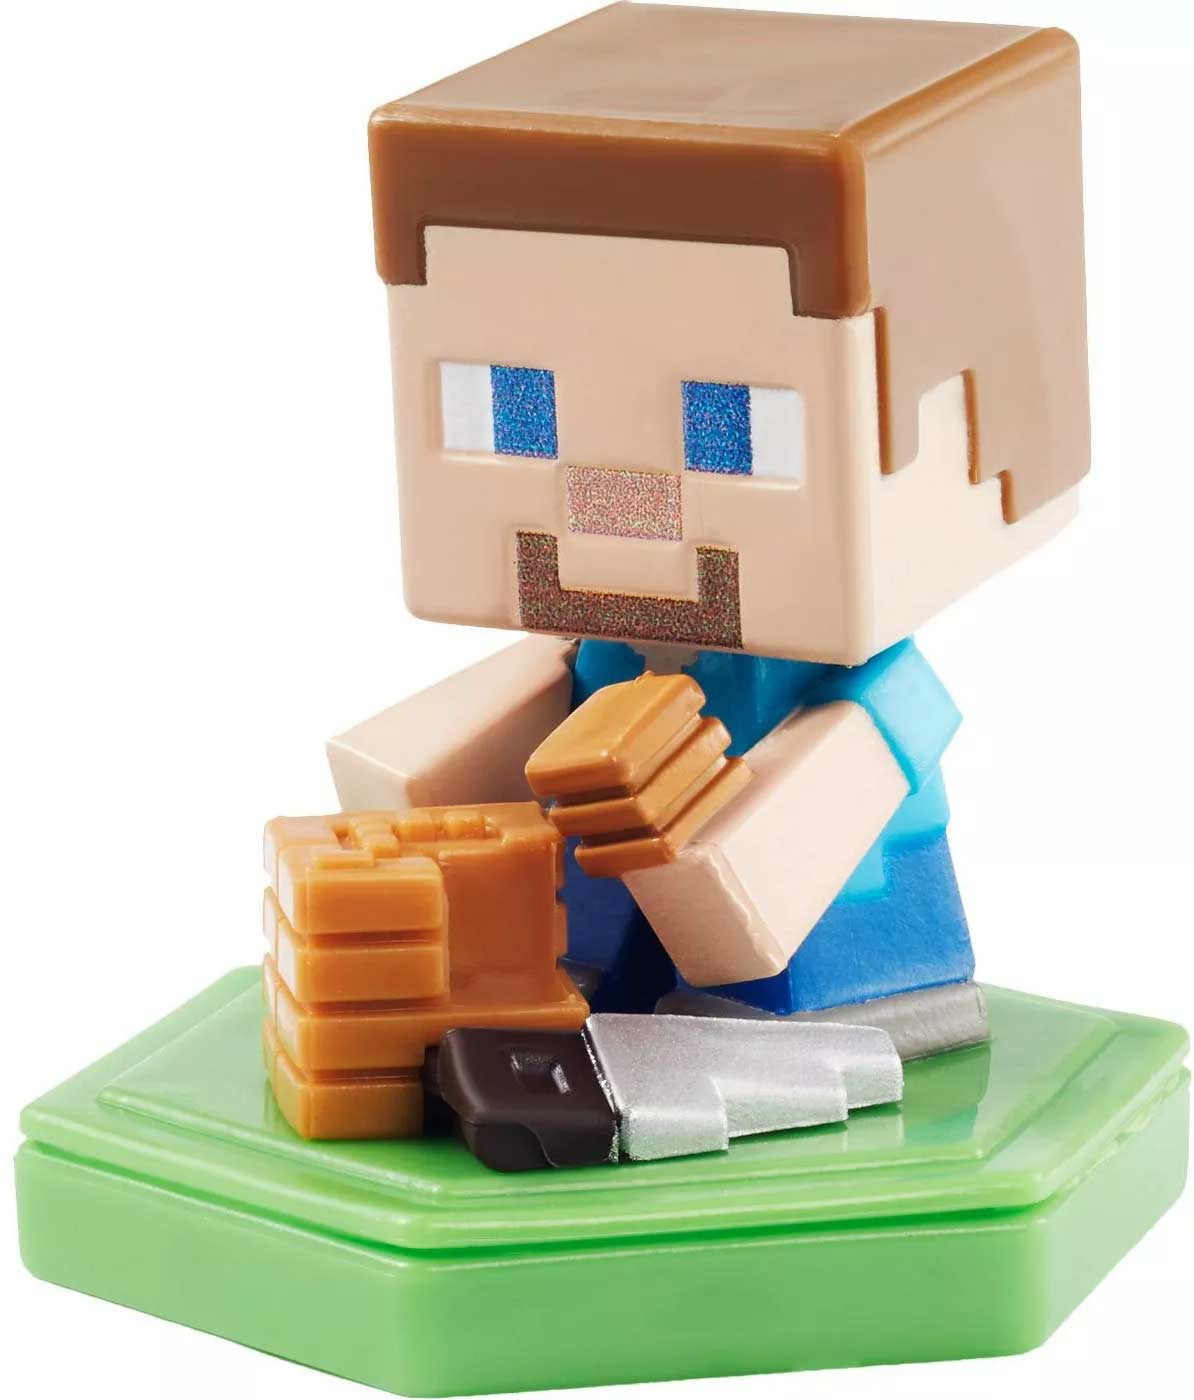 Minecraft Earth Boost Minis Action Figurine Figures E Augmented Reality Game